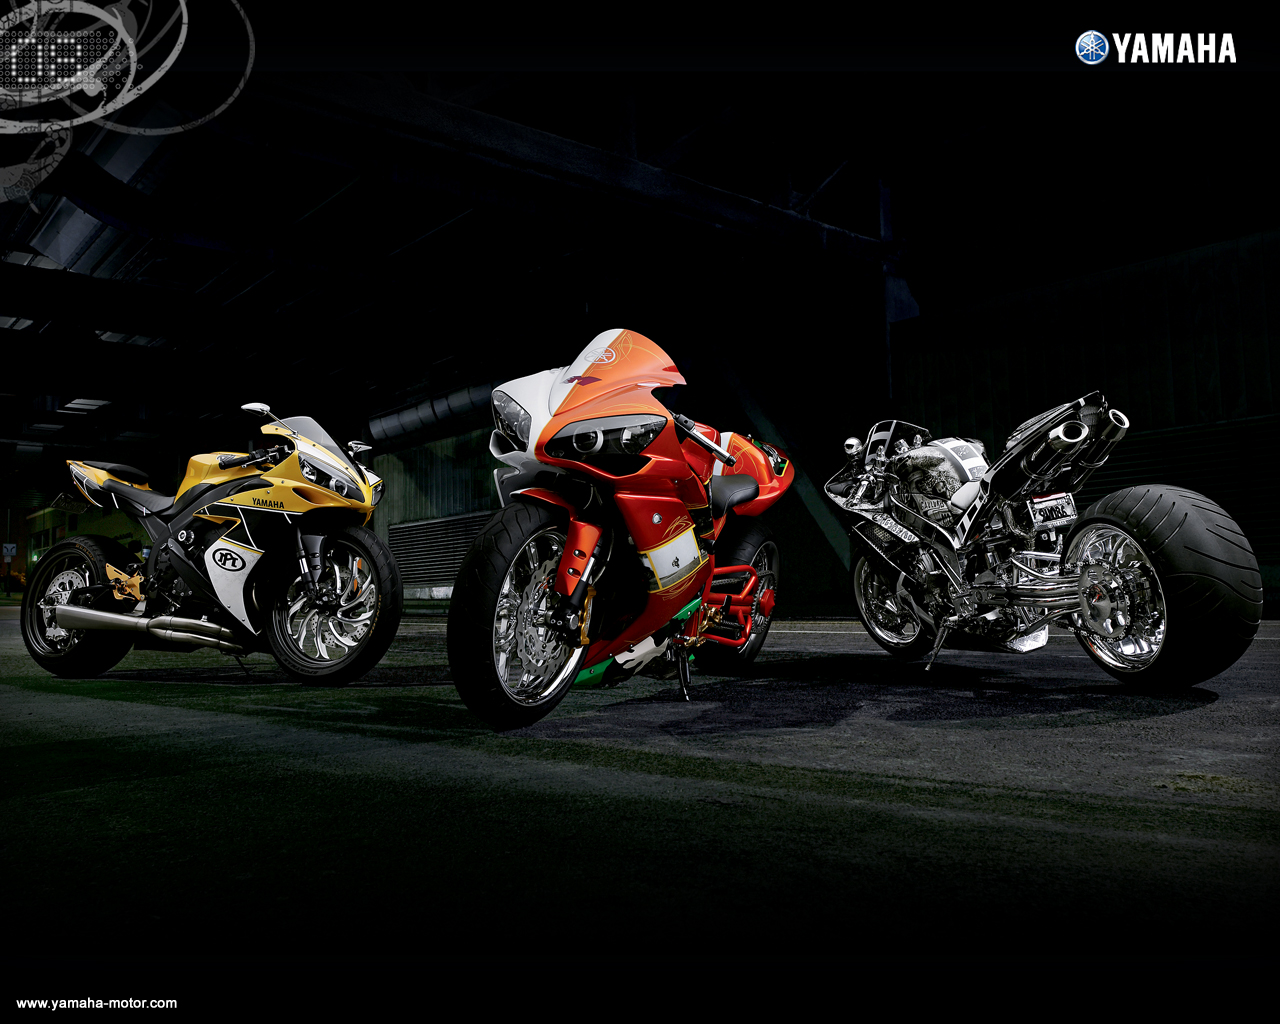 HD Yamaha Wallpaper Background Image For